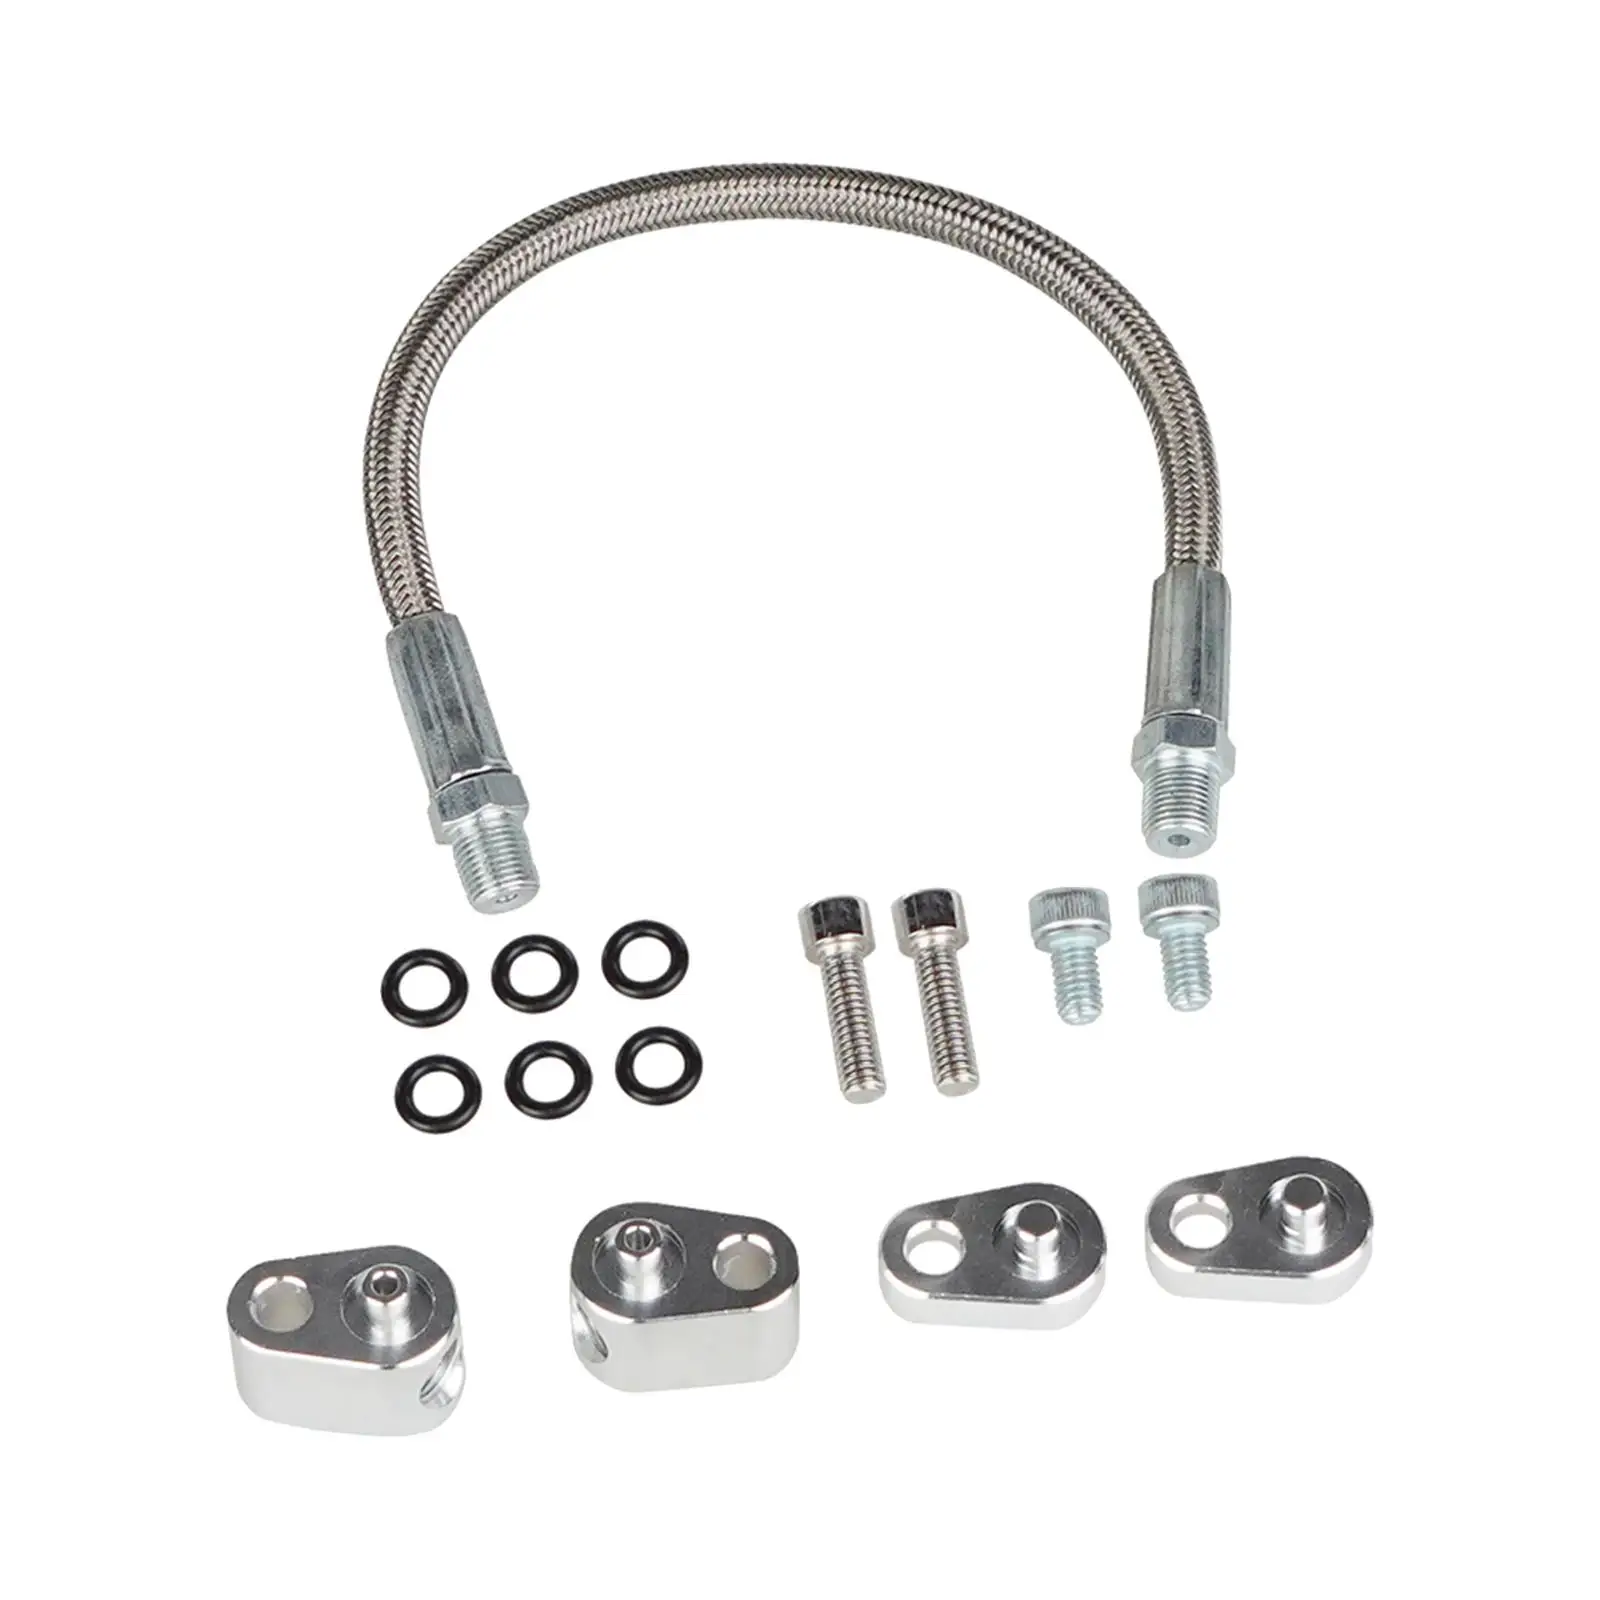 Coolant Crossover Direct Replace Aluminum Alloy Easy Installation Steam Port Kits Braided Hose Kit for GM LS Series Engines